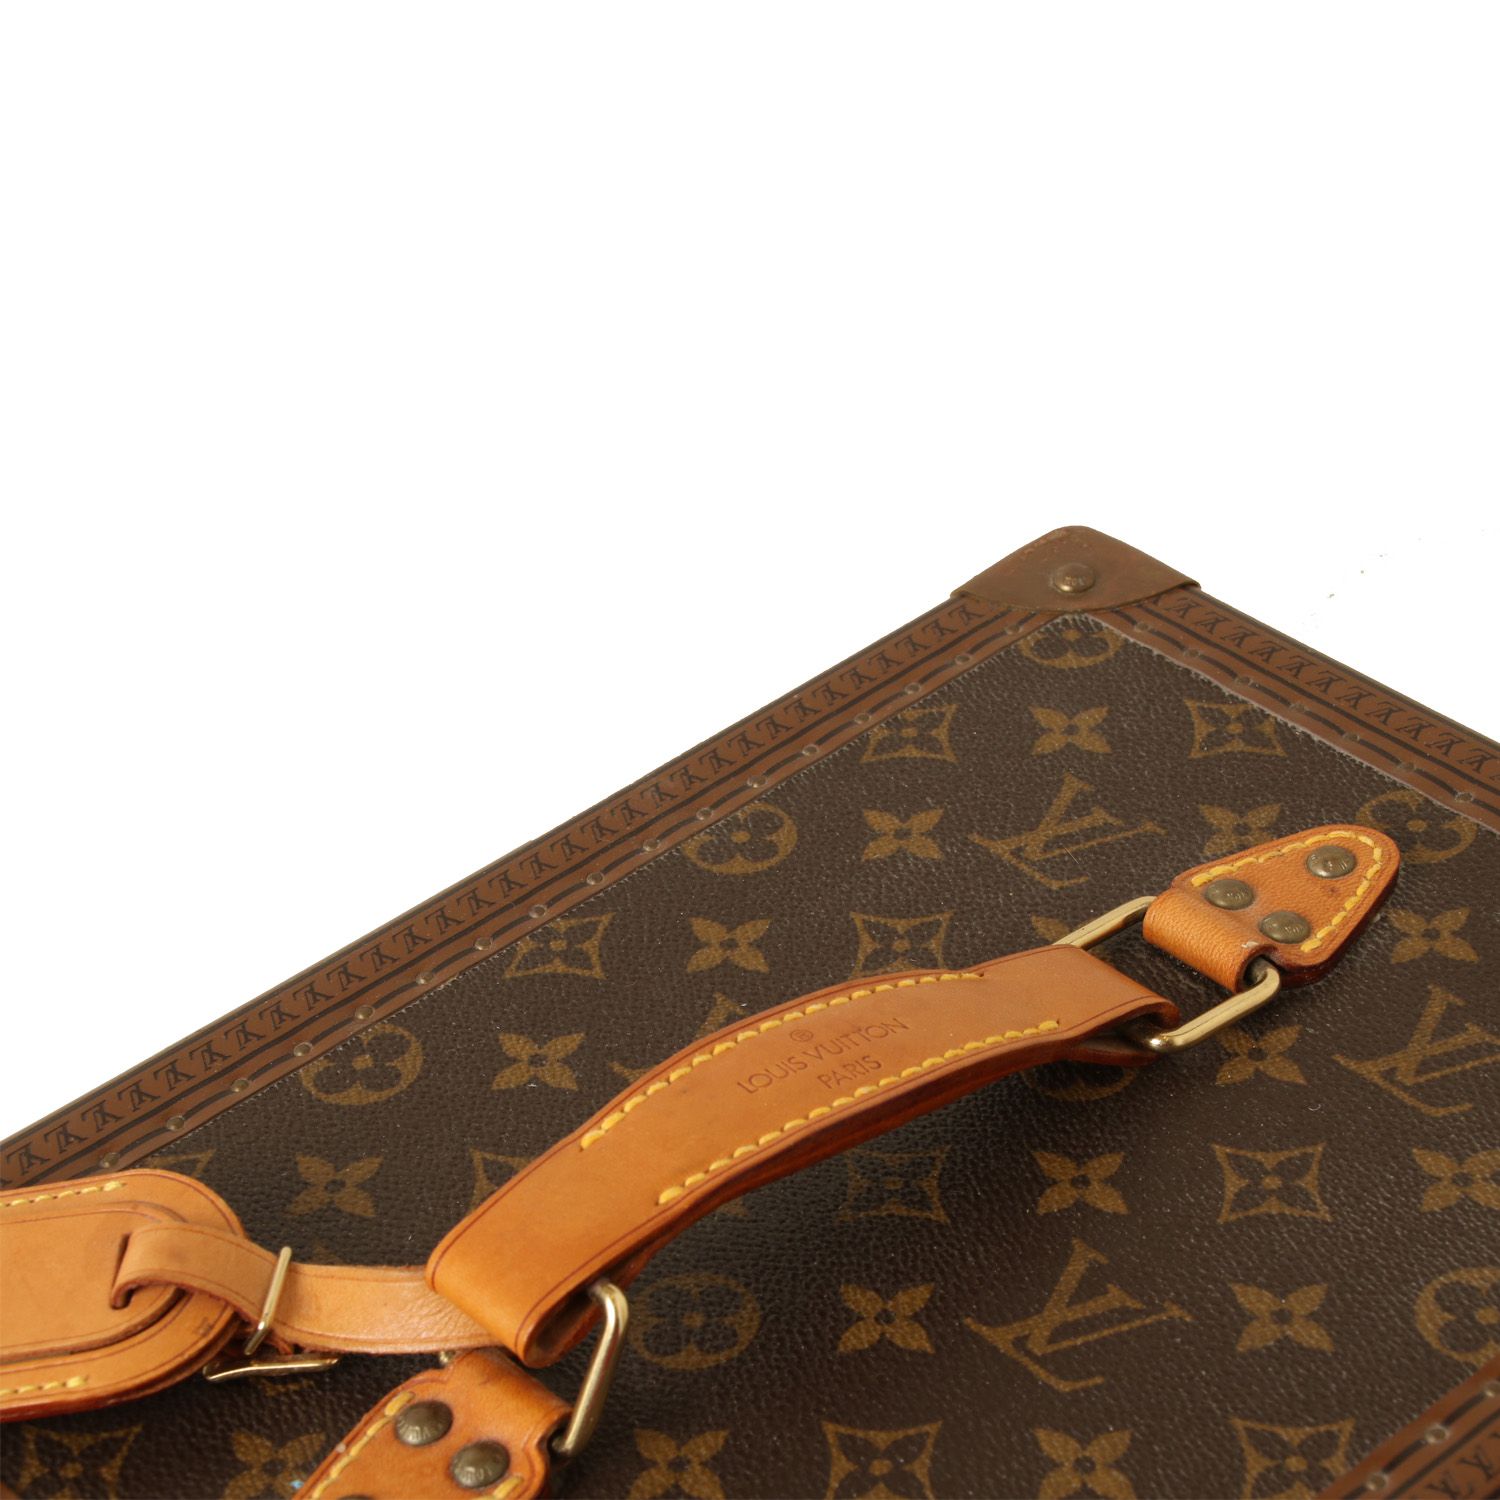 Louis Vuitton Leather Belt for Sale in Online Auctions